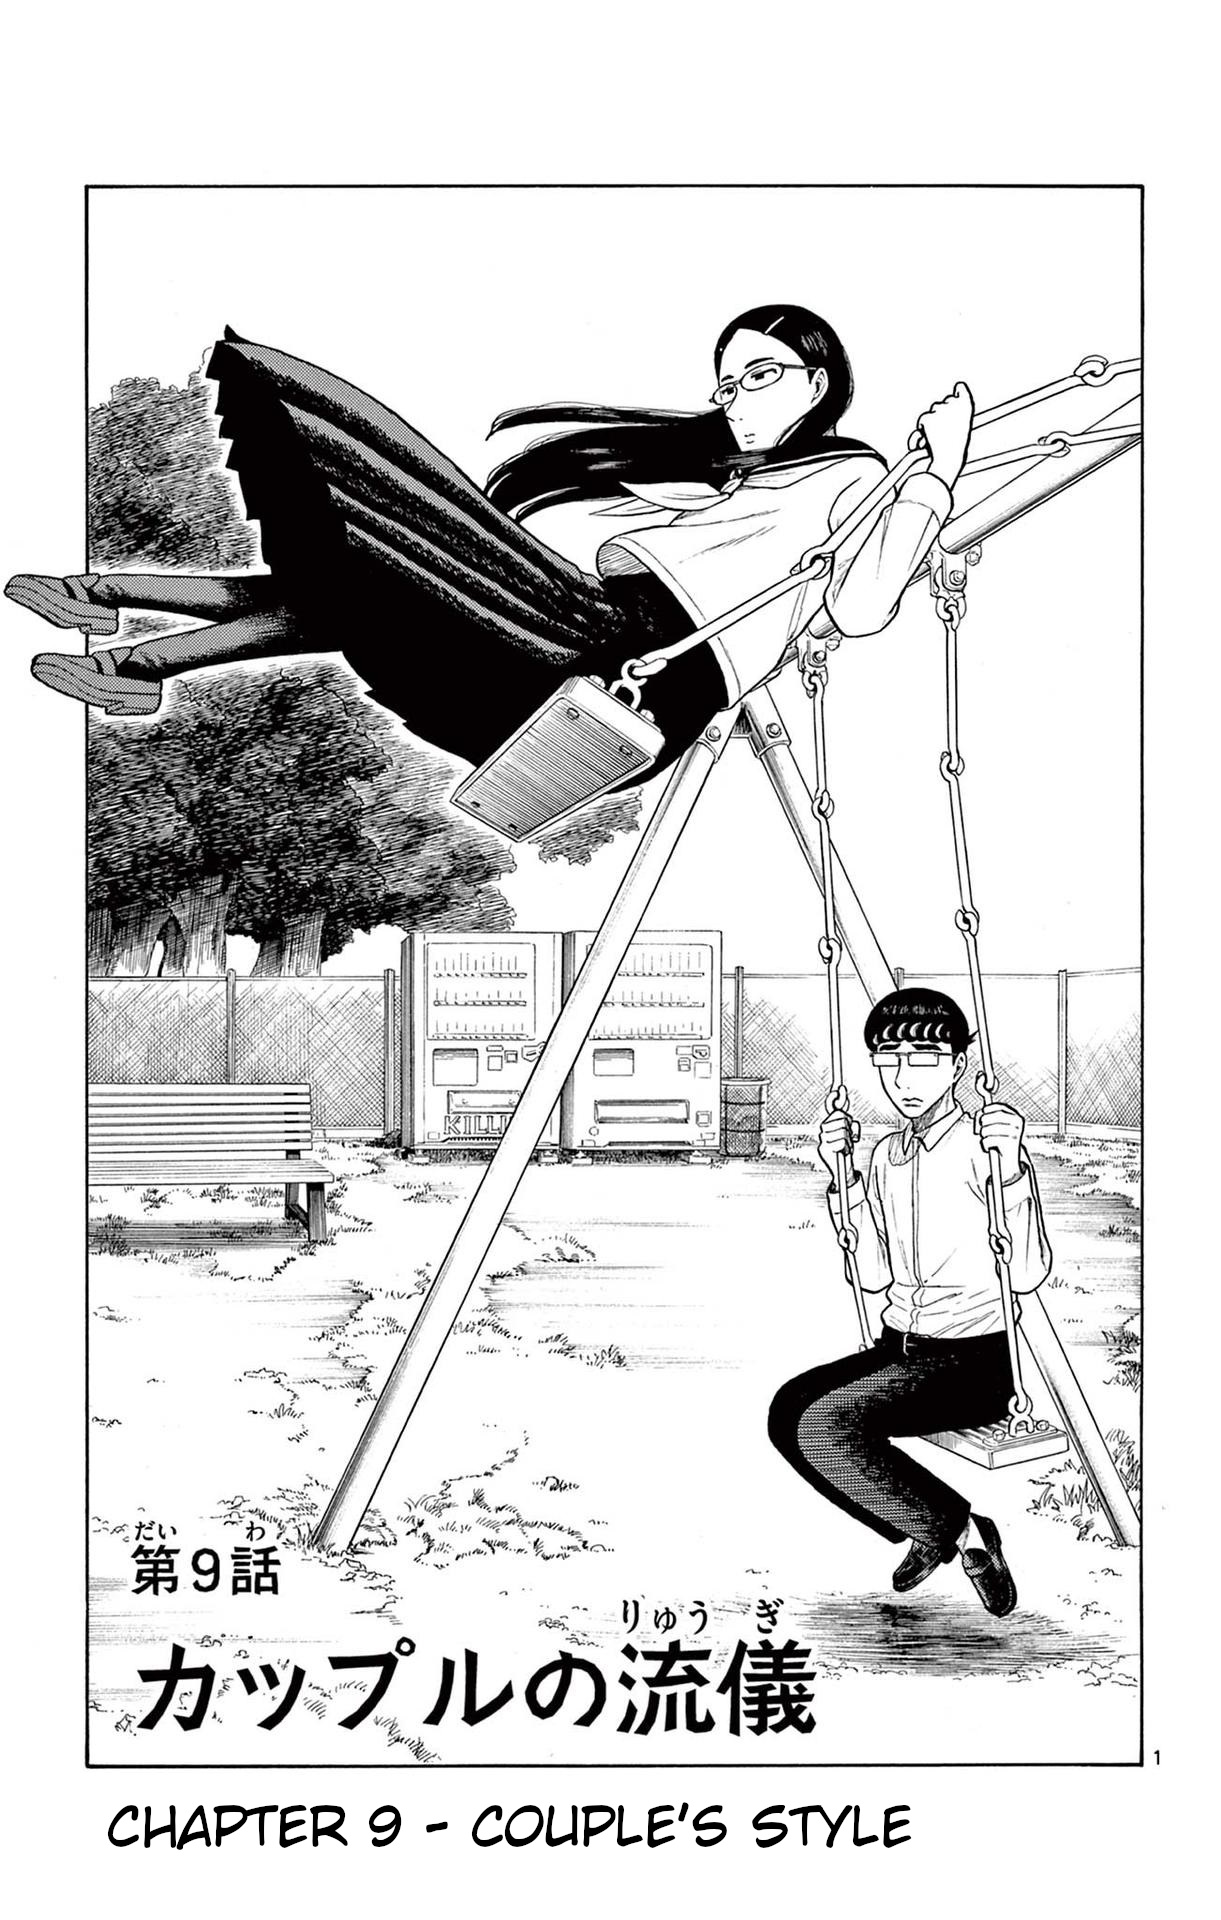 Shiroyama To Mita-San Vol.2 Chapter 9: Couple's Style - Picture 1